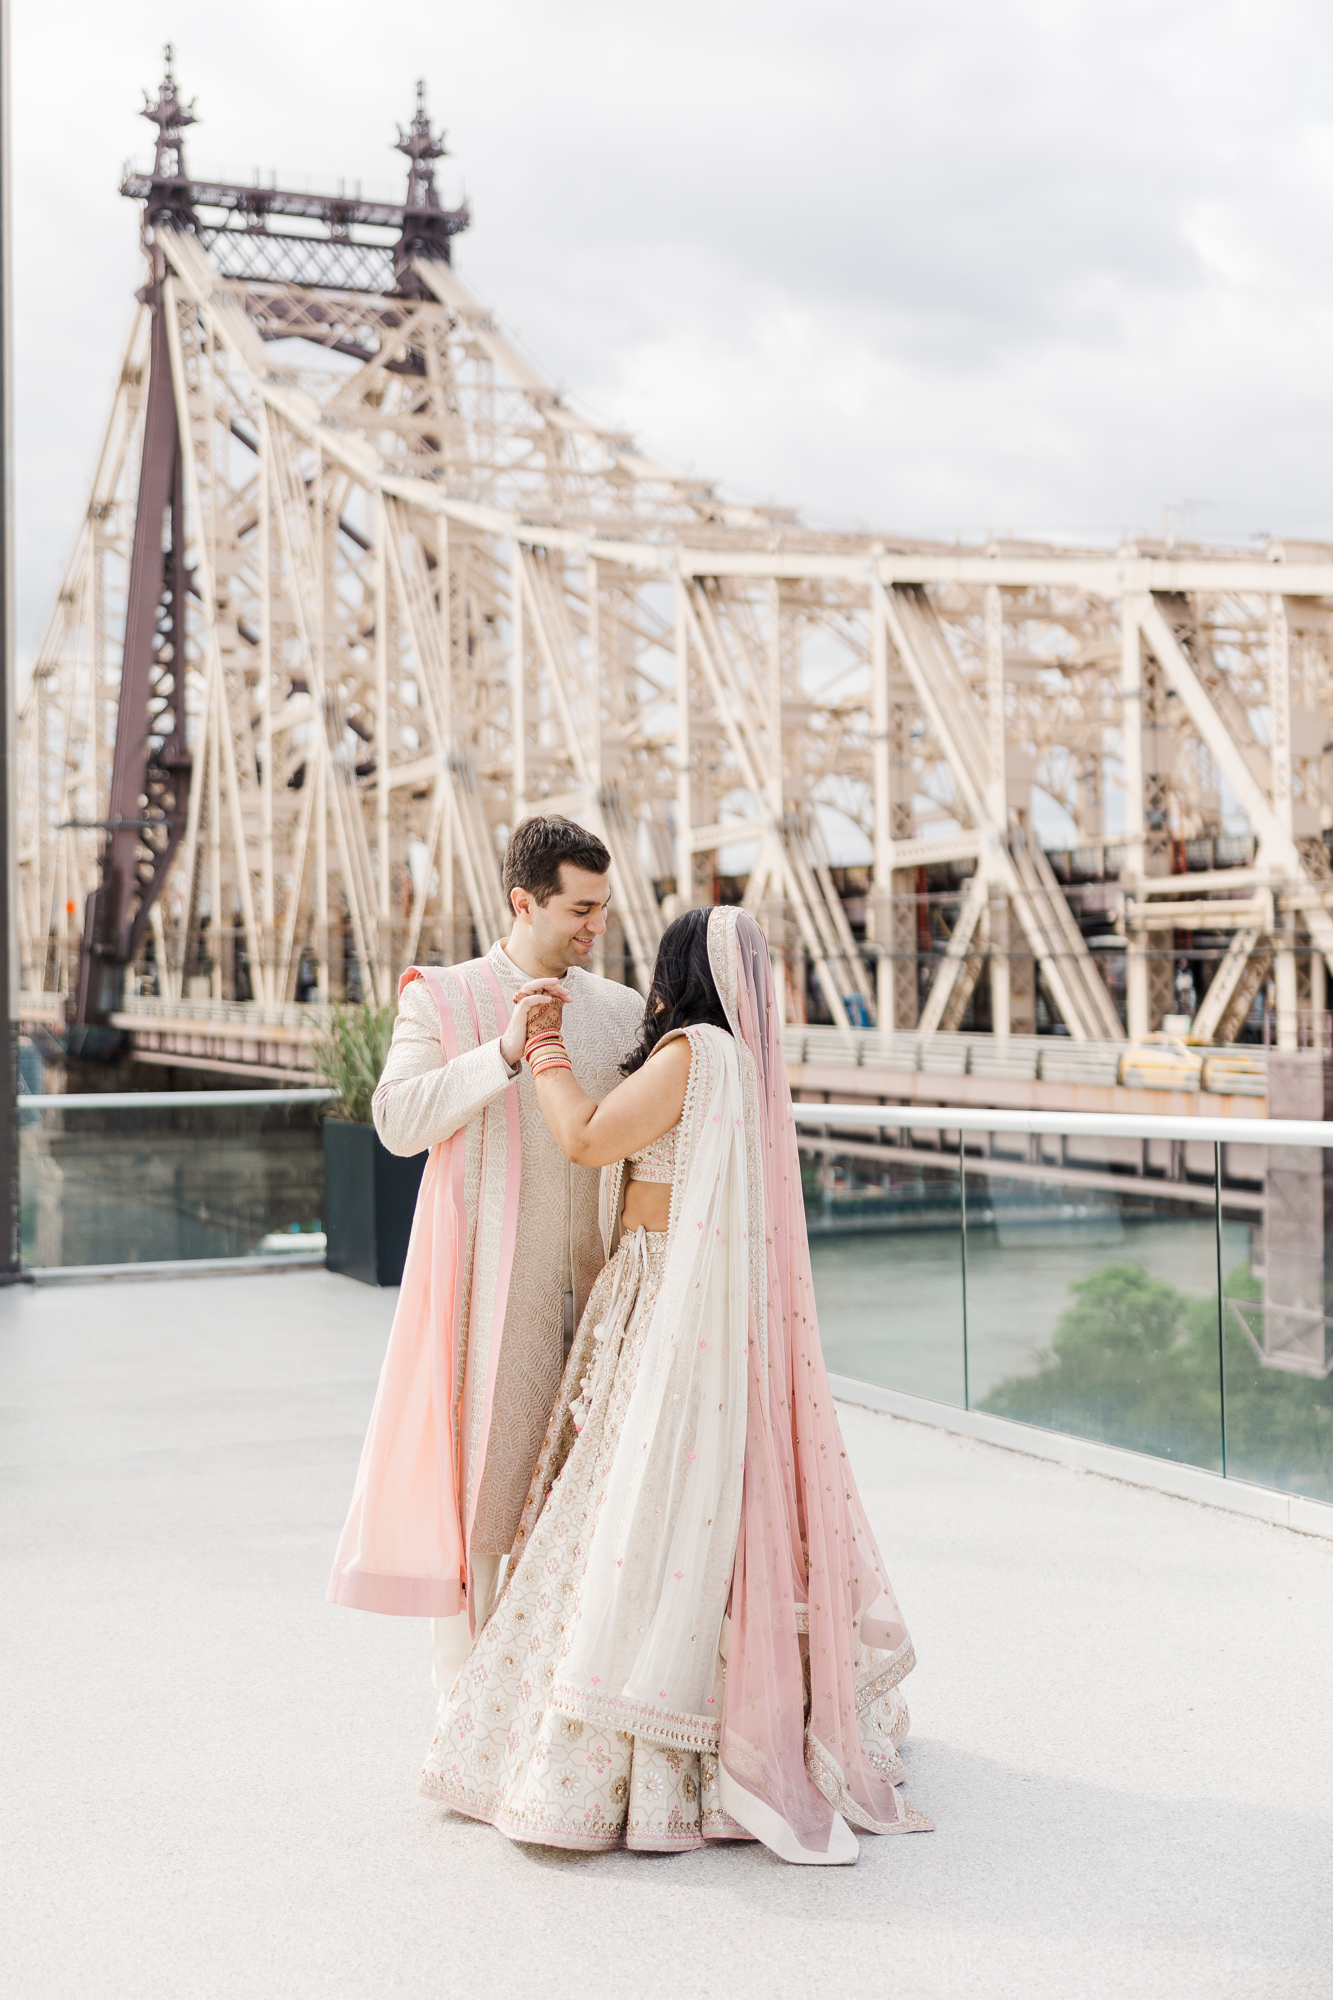 Incredible Ravel Hotel Wedding in a Peachy, Pastel Palette